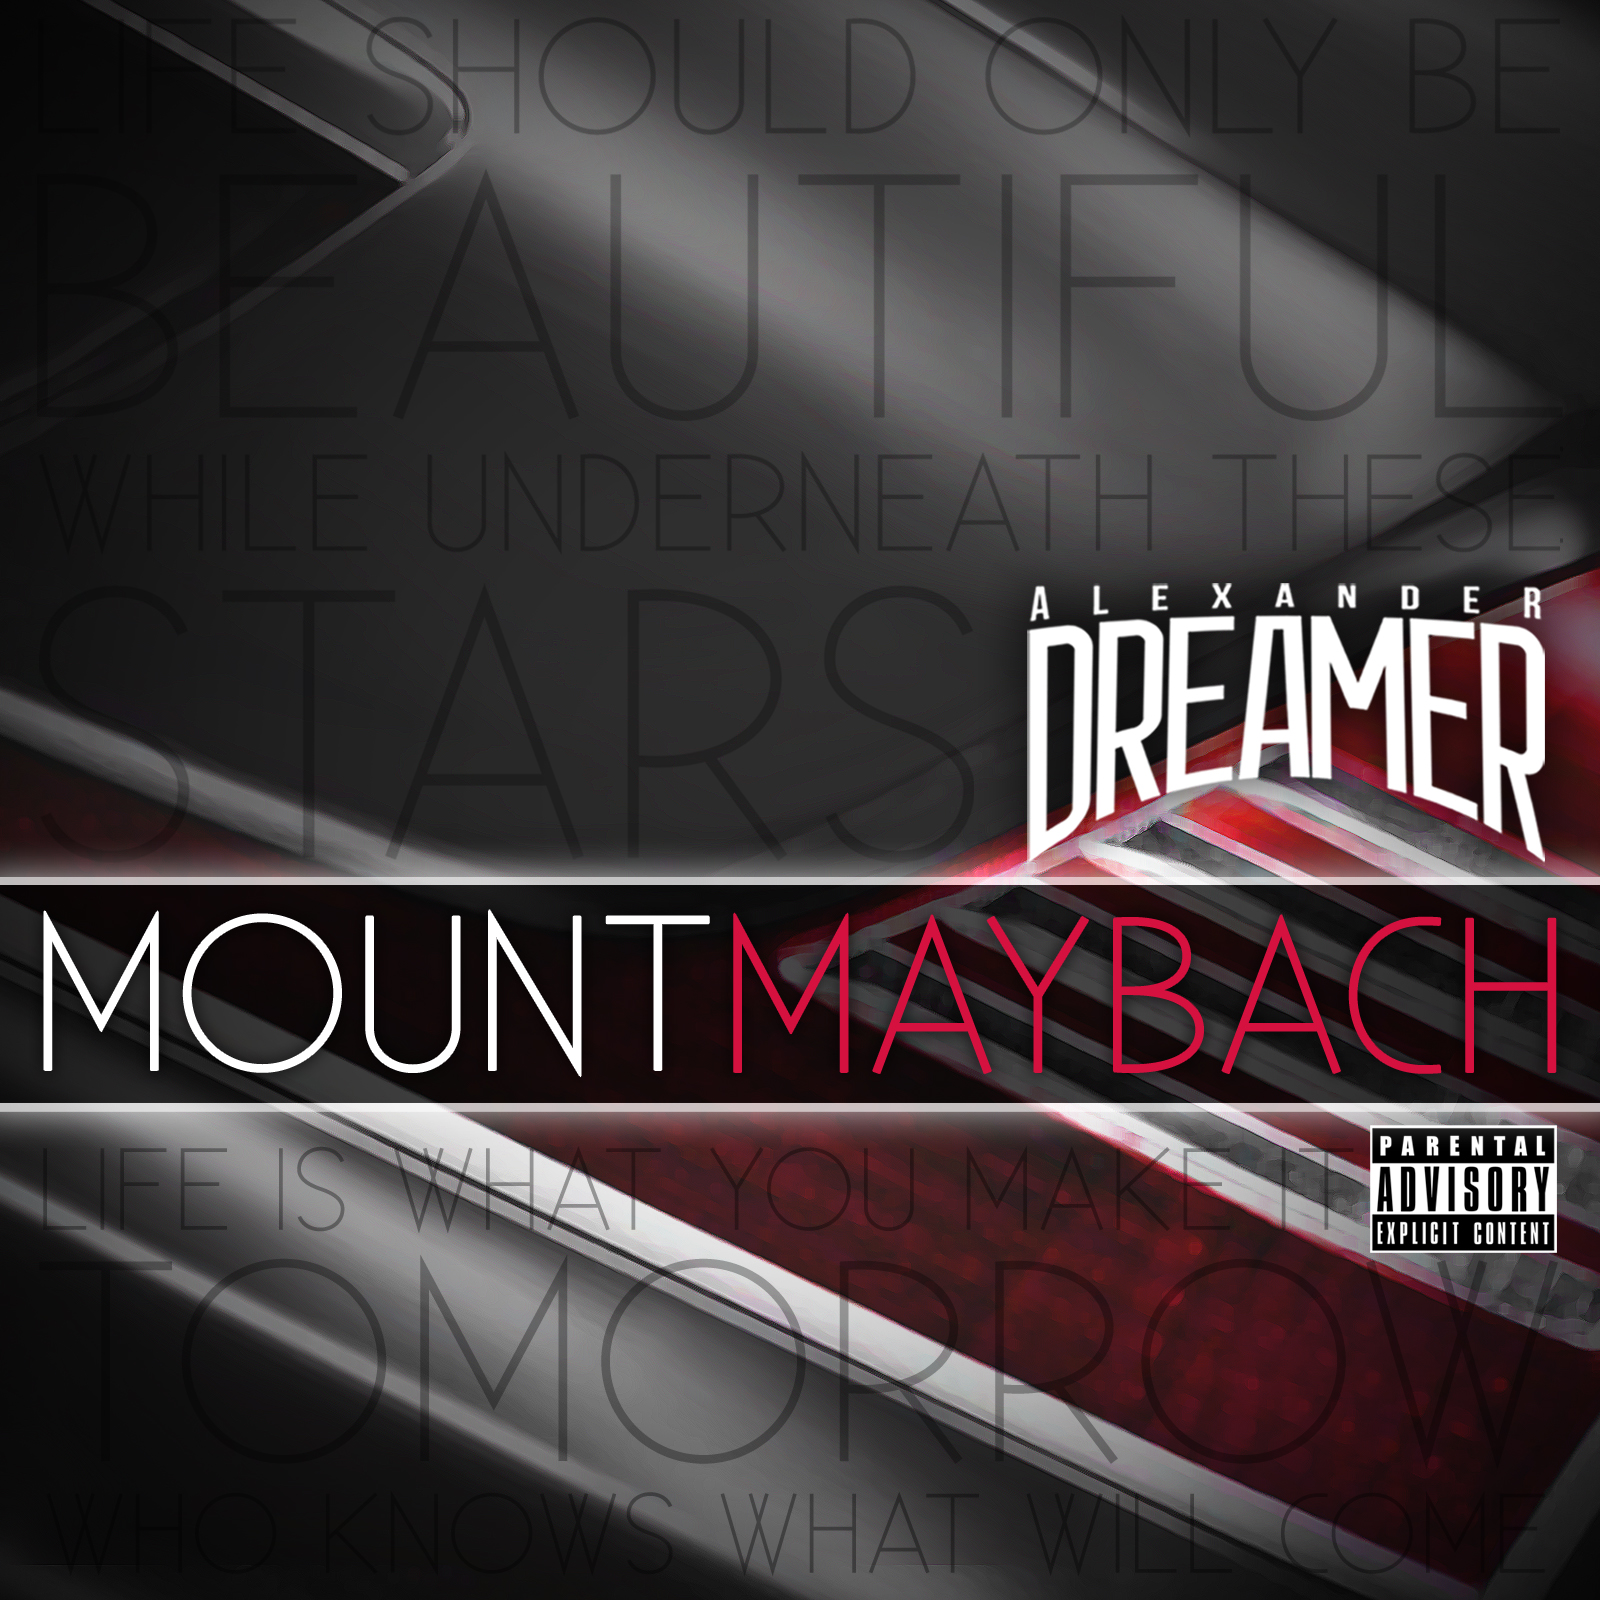 alexander-dreamer-mount-maybach-cover-HHS1987-2013 Alexander Dreamer - Mount Maybach  